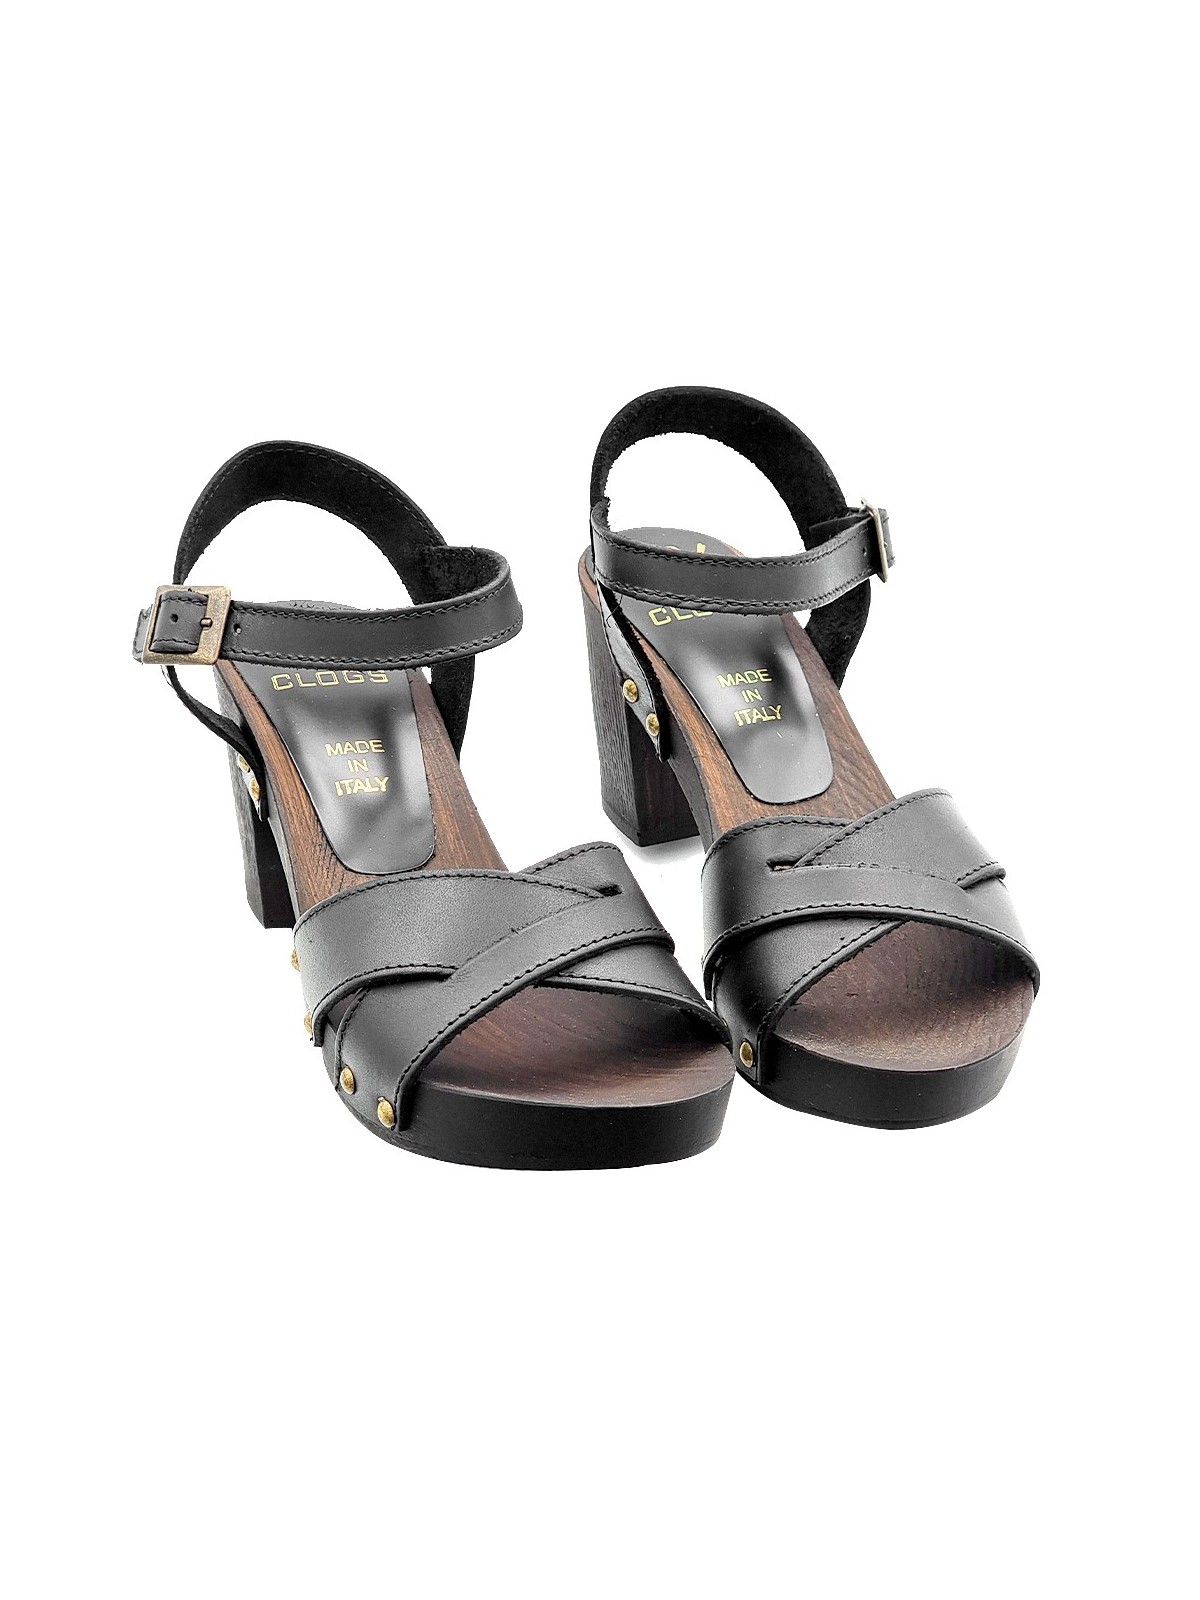 SANDALS WITH CROSSED BANDS IN BLACK LEATHER